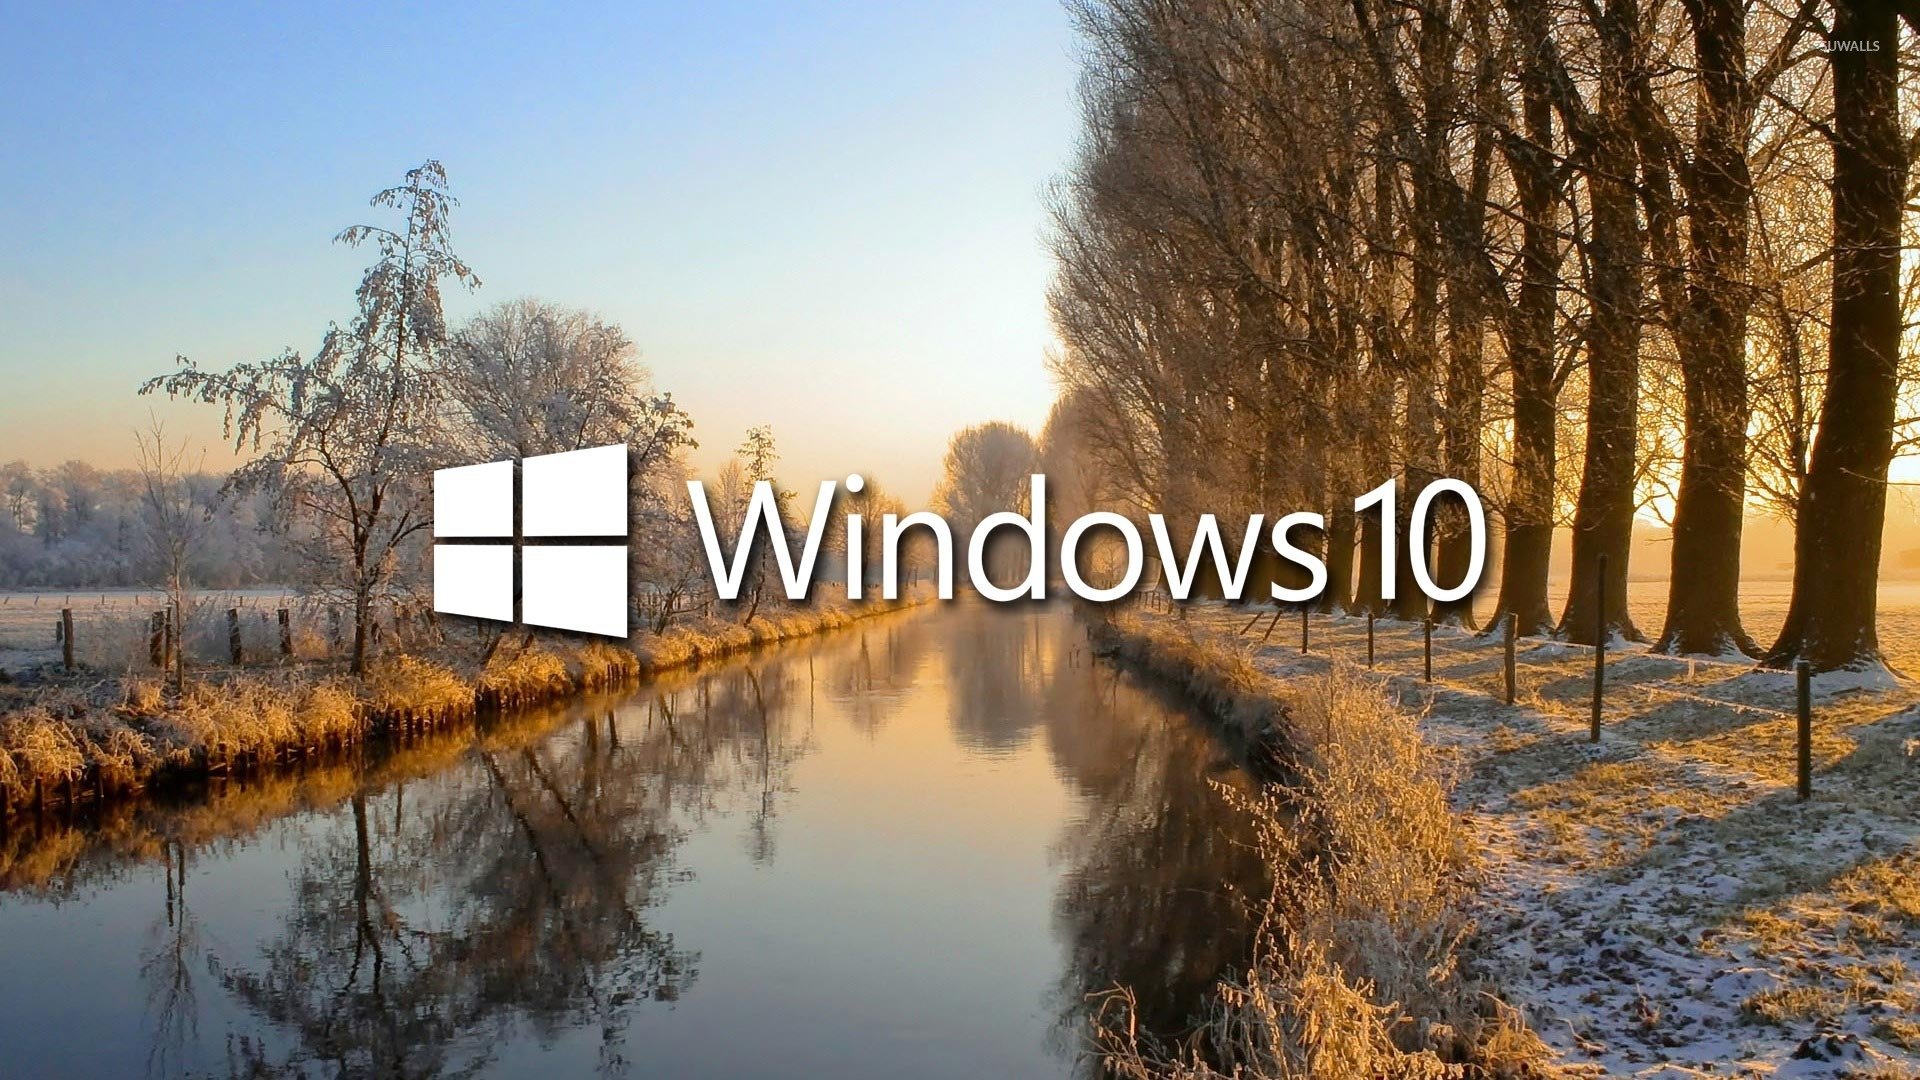 Windows 10 on the frosty river wallpaper 1366x768 1366x768